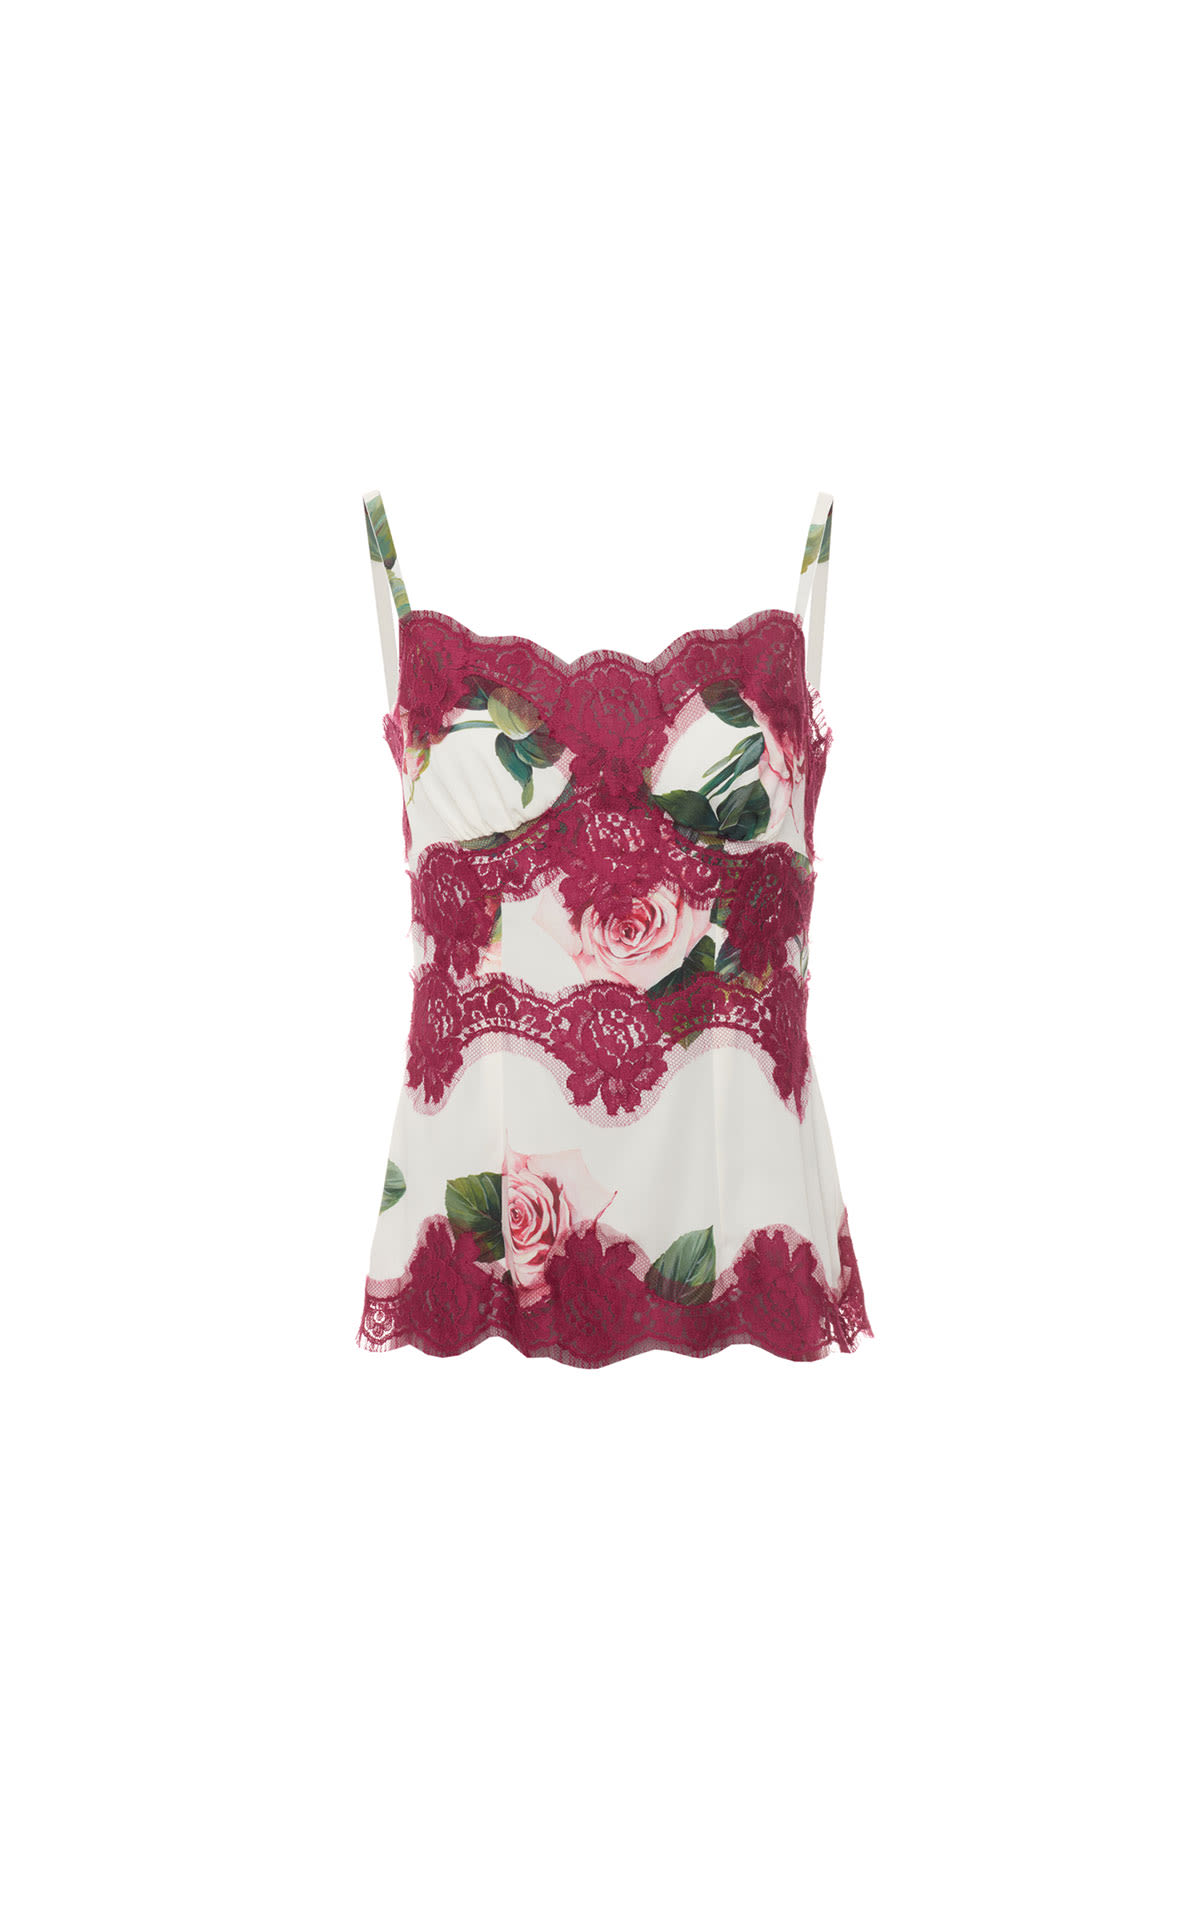 Dolce & Gabbana Rose print lace camisole from Bicester Village